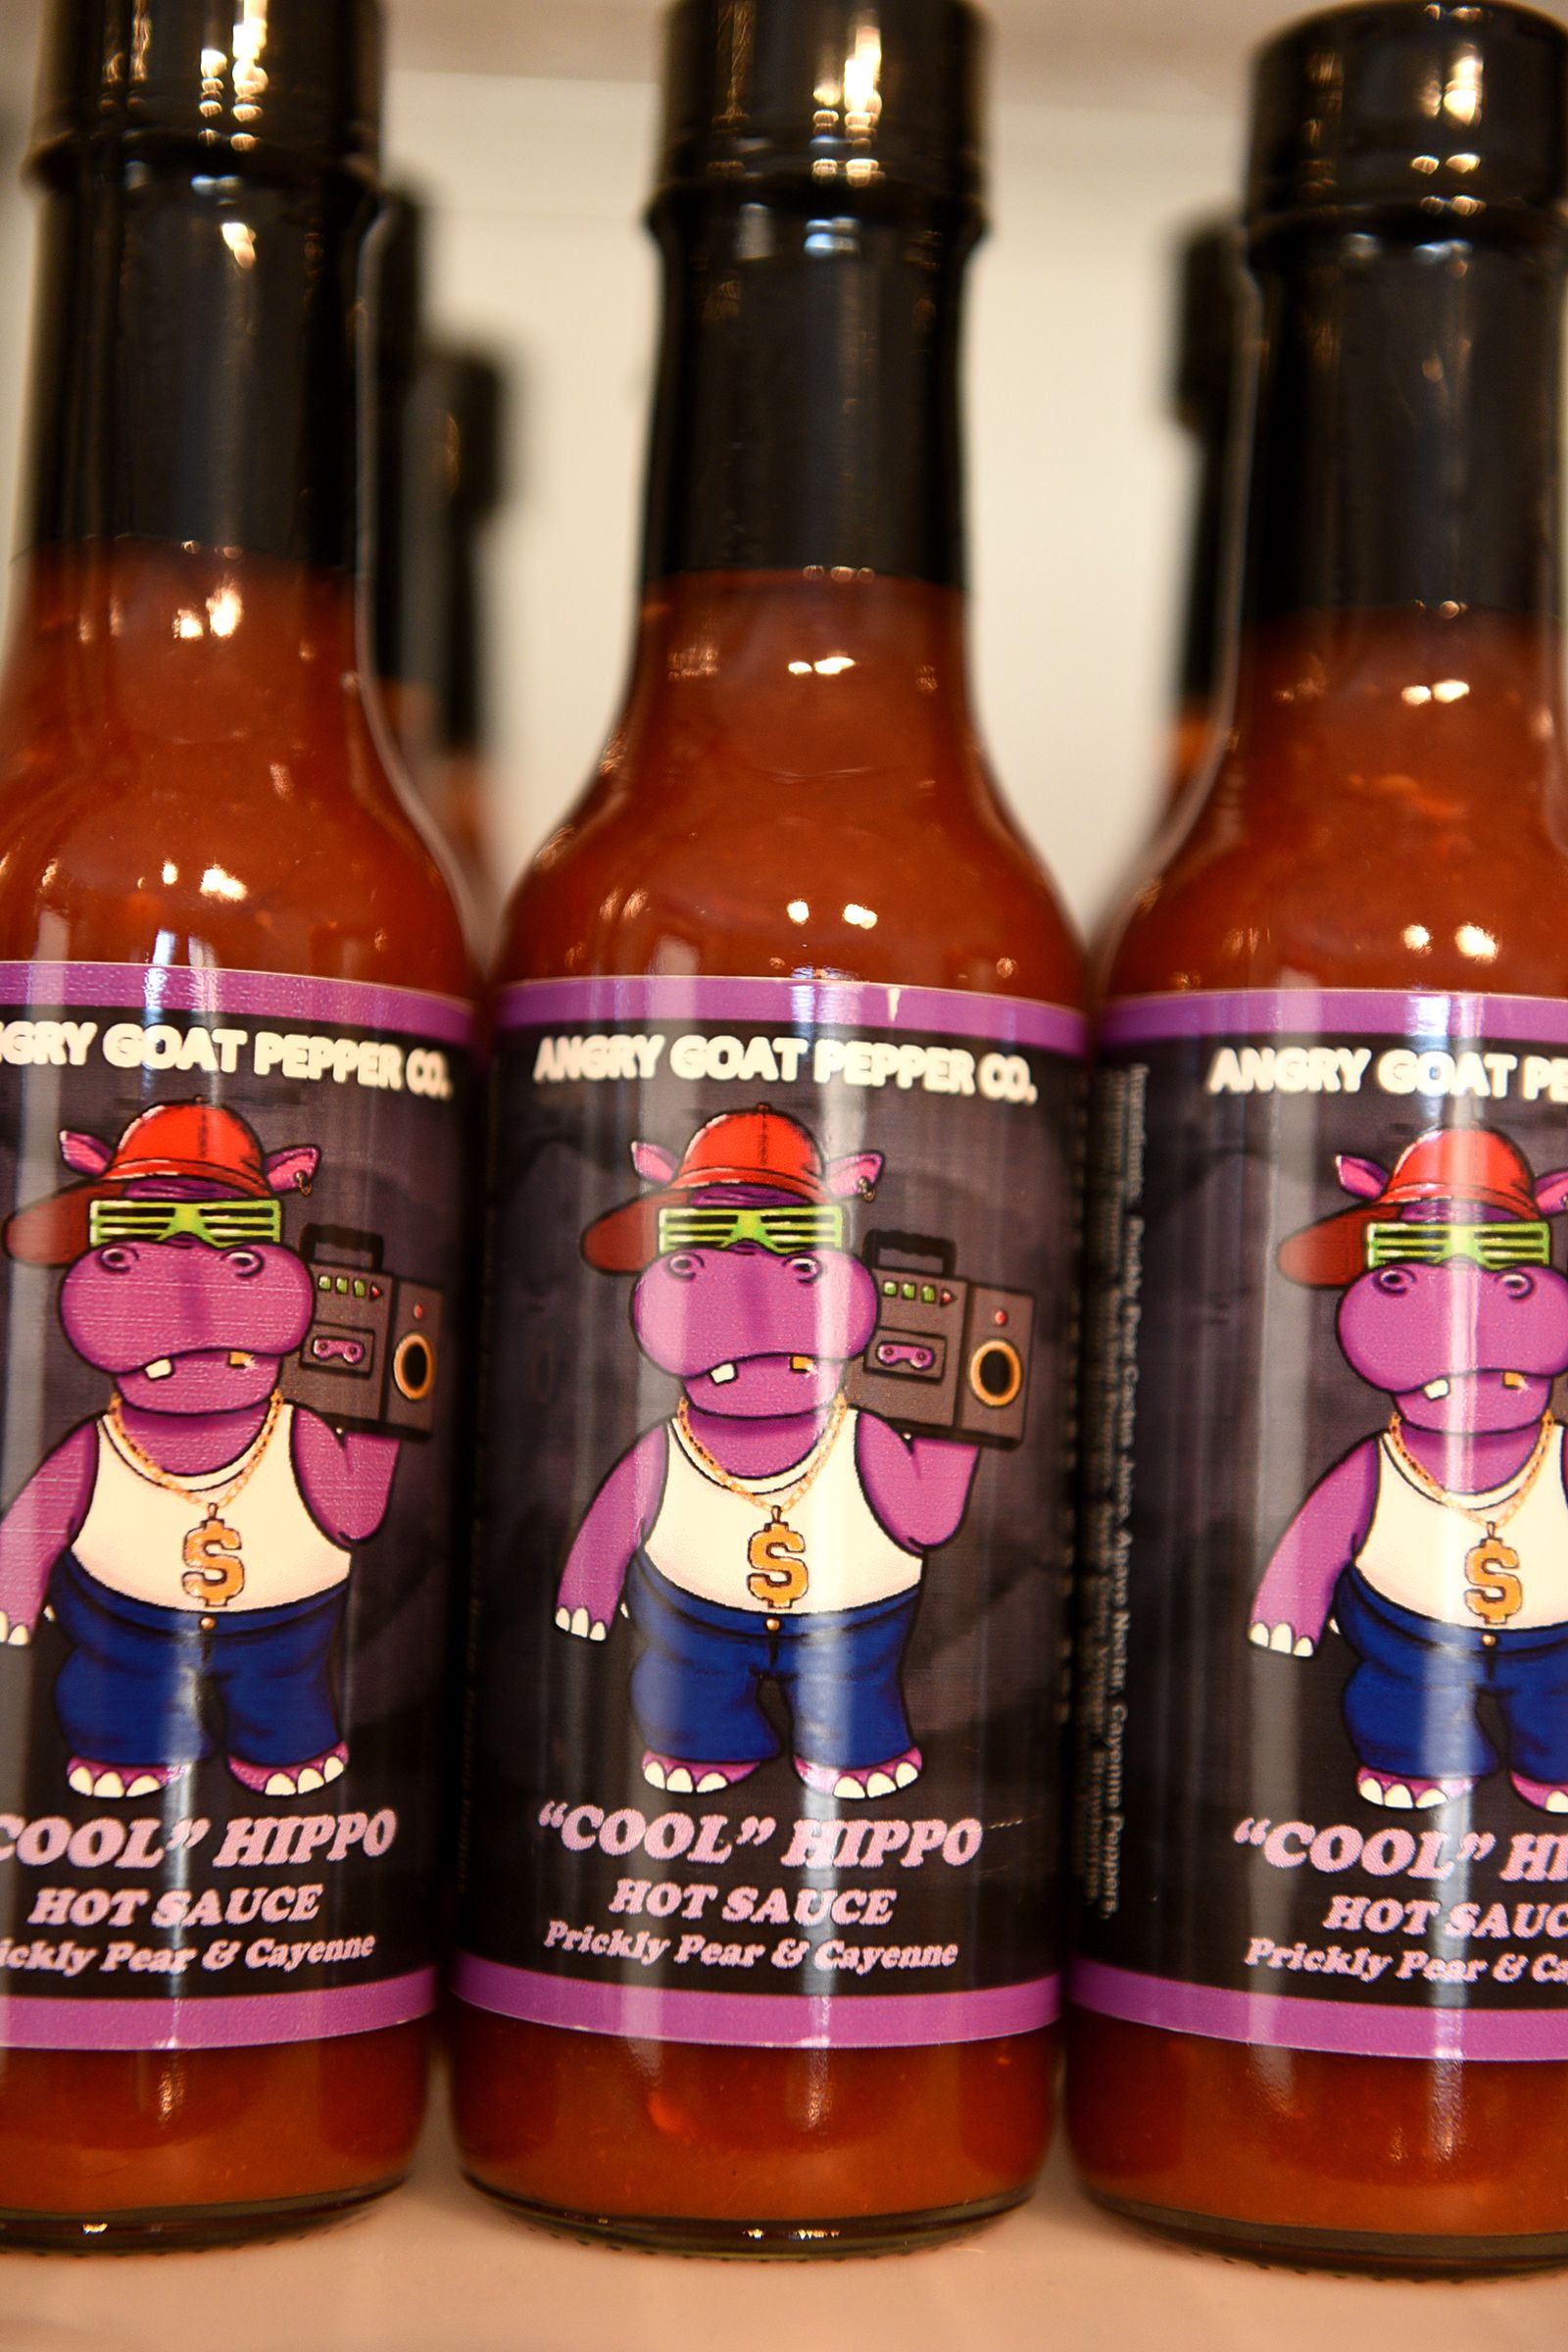 Cool Hippo Hot Sauce, with prickly pear and cayenne, is one of the many products made by Angry Goat Pepper Co. for sale in their retail store in White River Junction, Vt., on Thursday, Jan. 8, 2020. ( Valley News - Jennifer Hauck) Copyright Valley News. May not be reprinted or used online without permission. Send requests to permission@vnews.com.